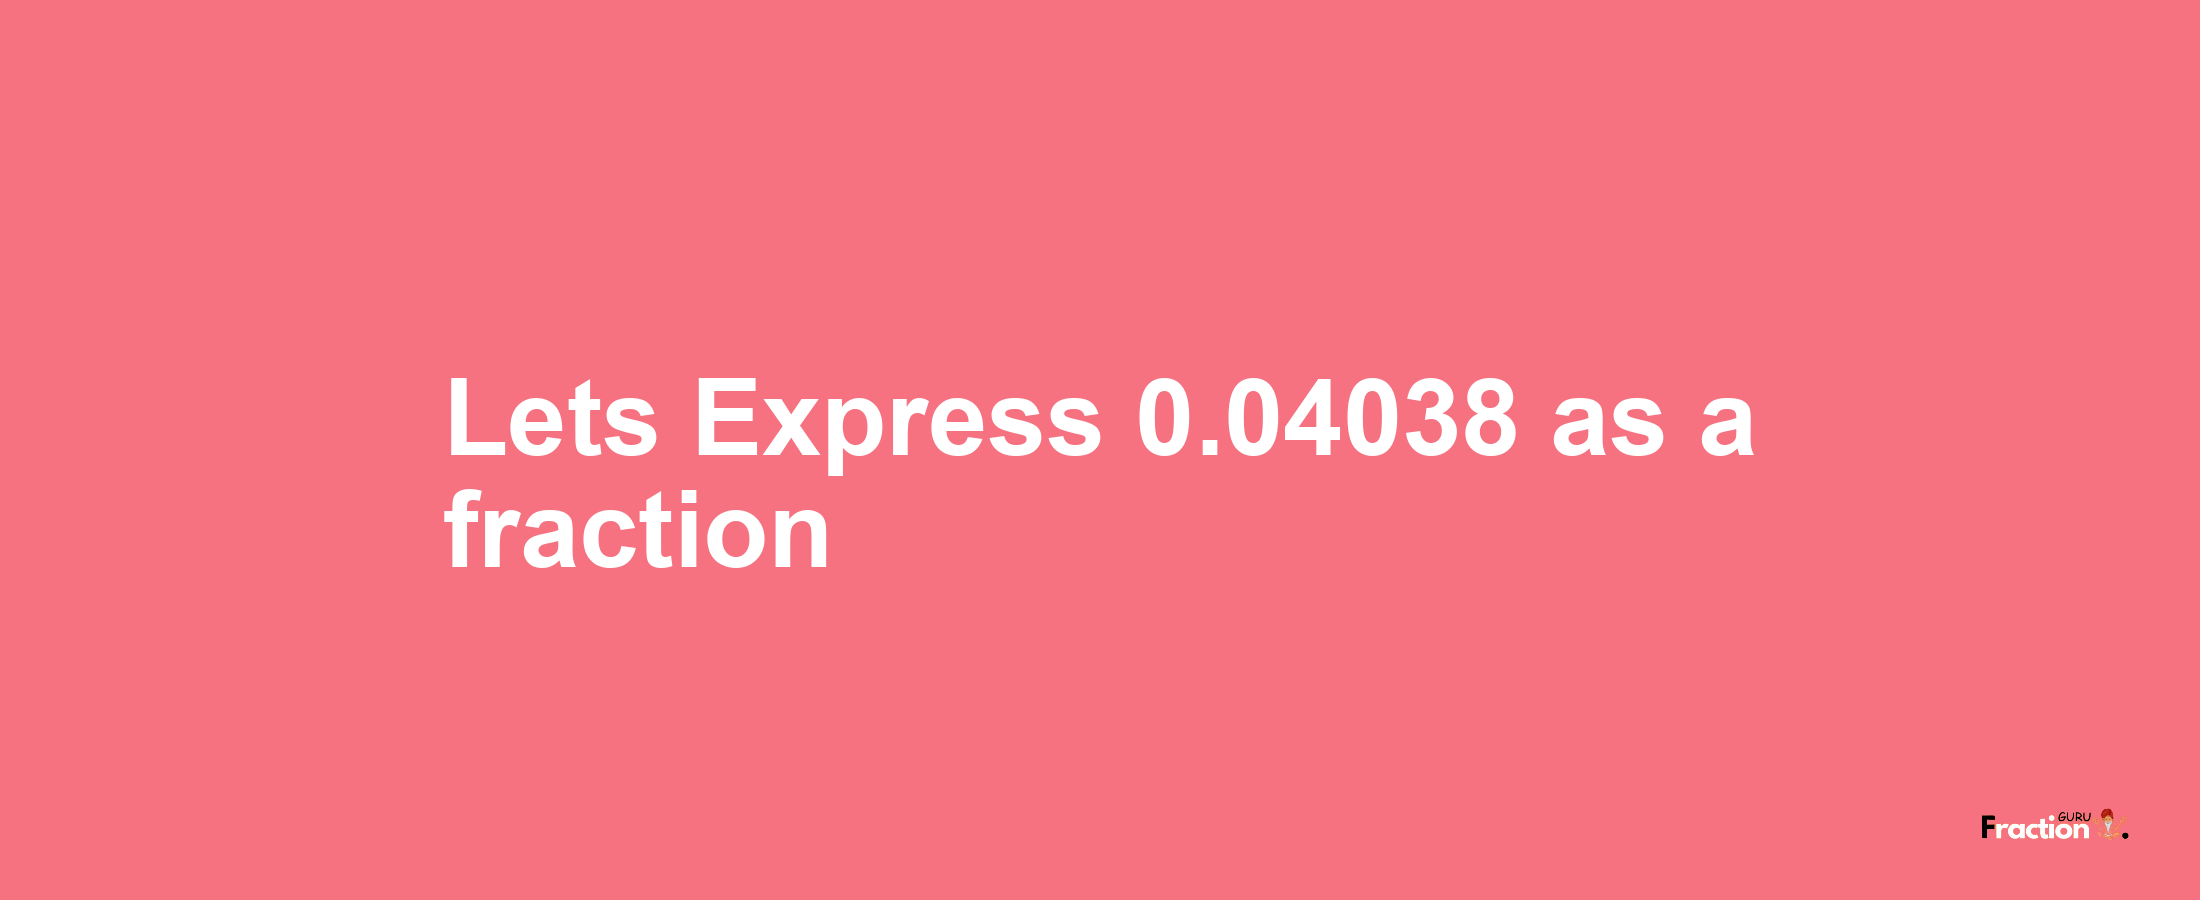 Lets Express 0.04038 as afraction